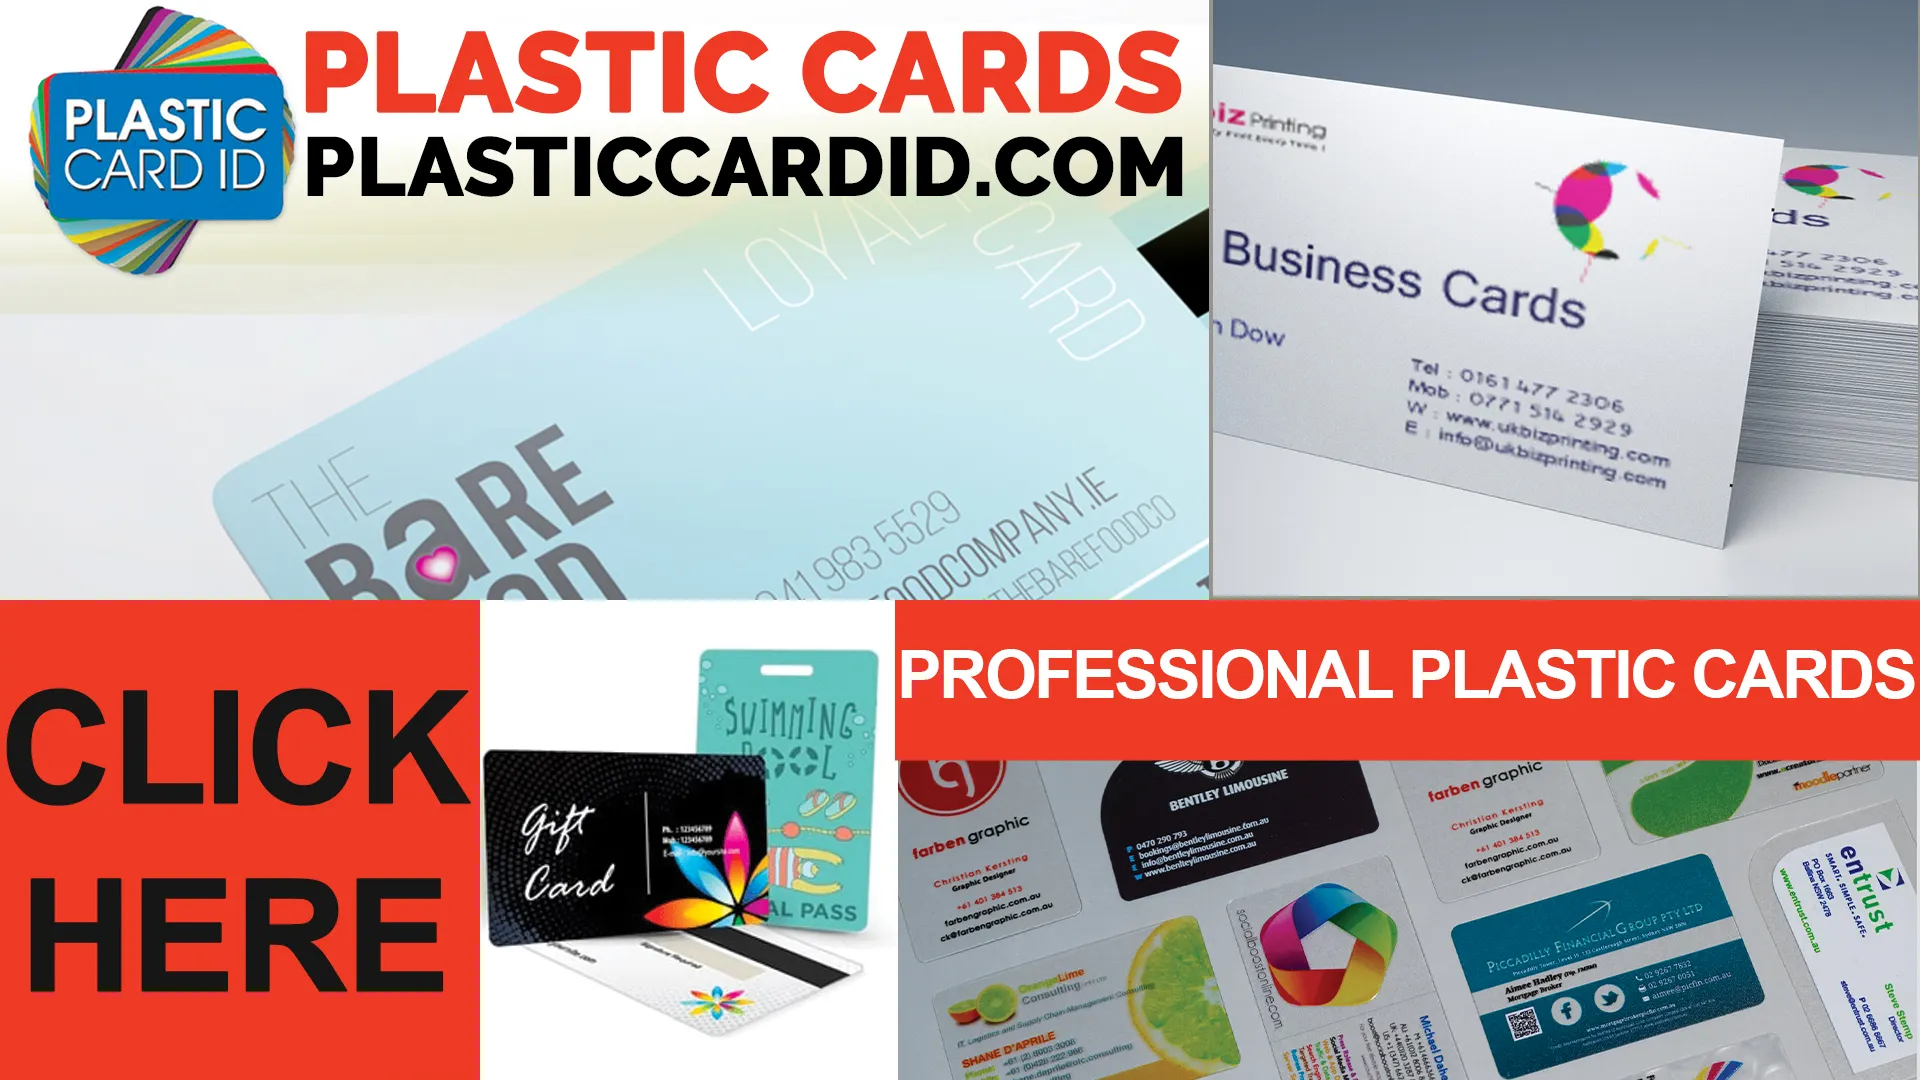 Welcome to the Revolution in Sustainable Card Manufacturing